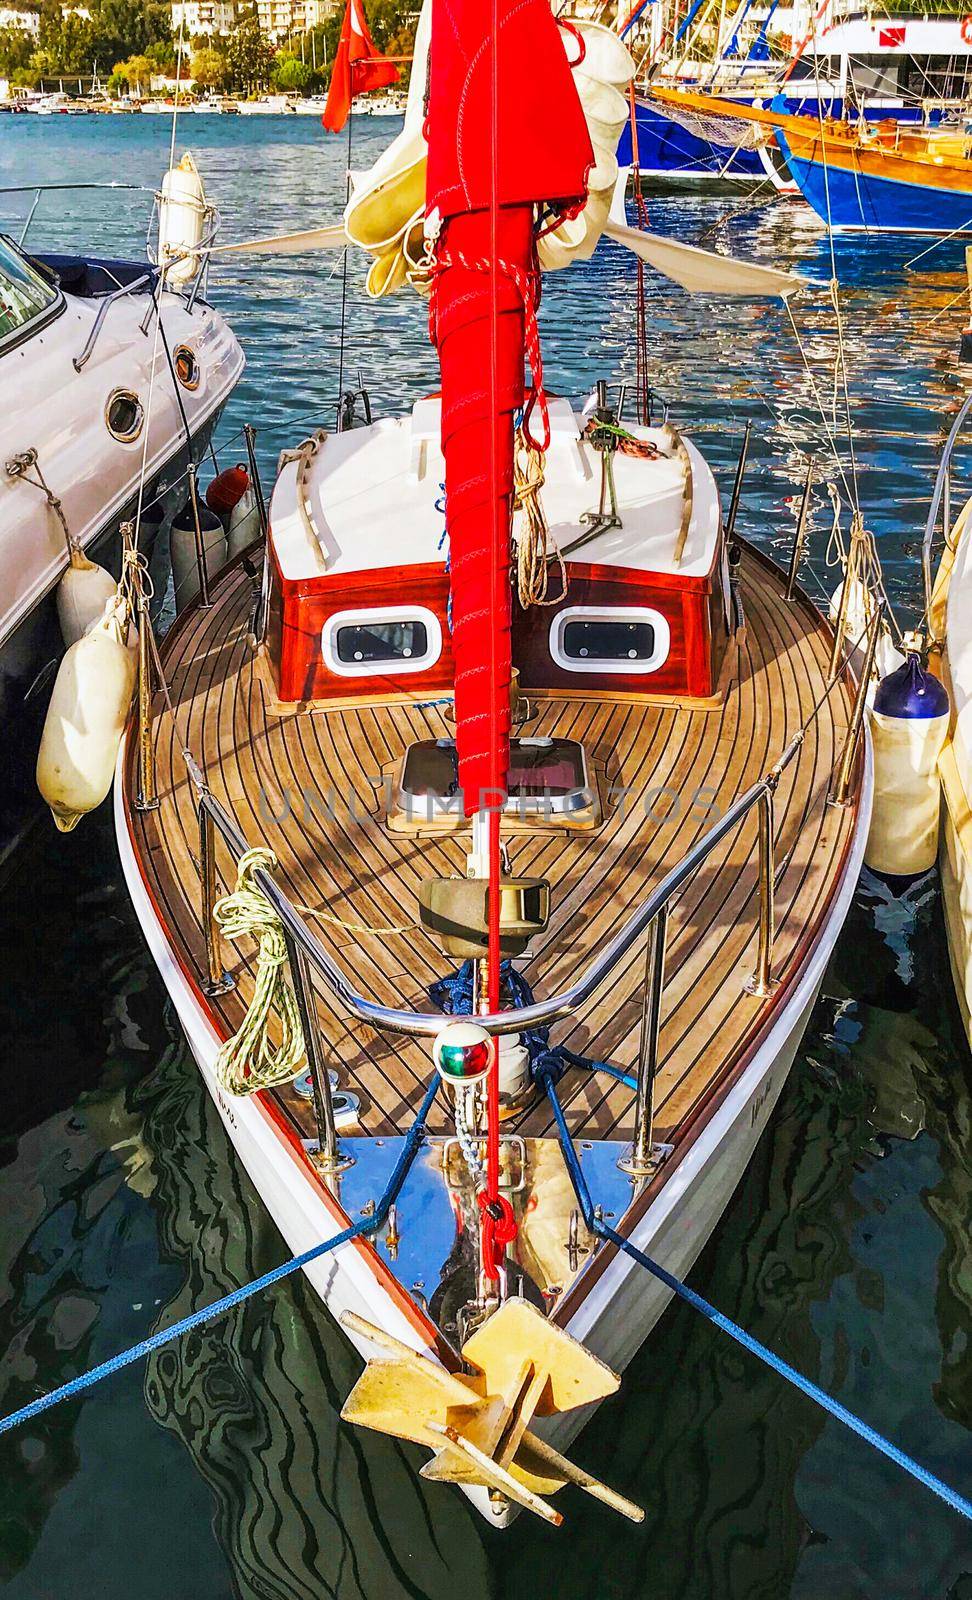 Small red sail yacht in marina. Smile